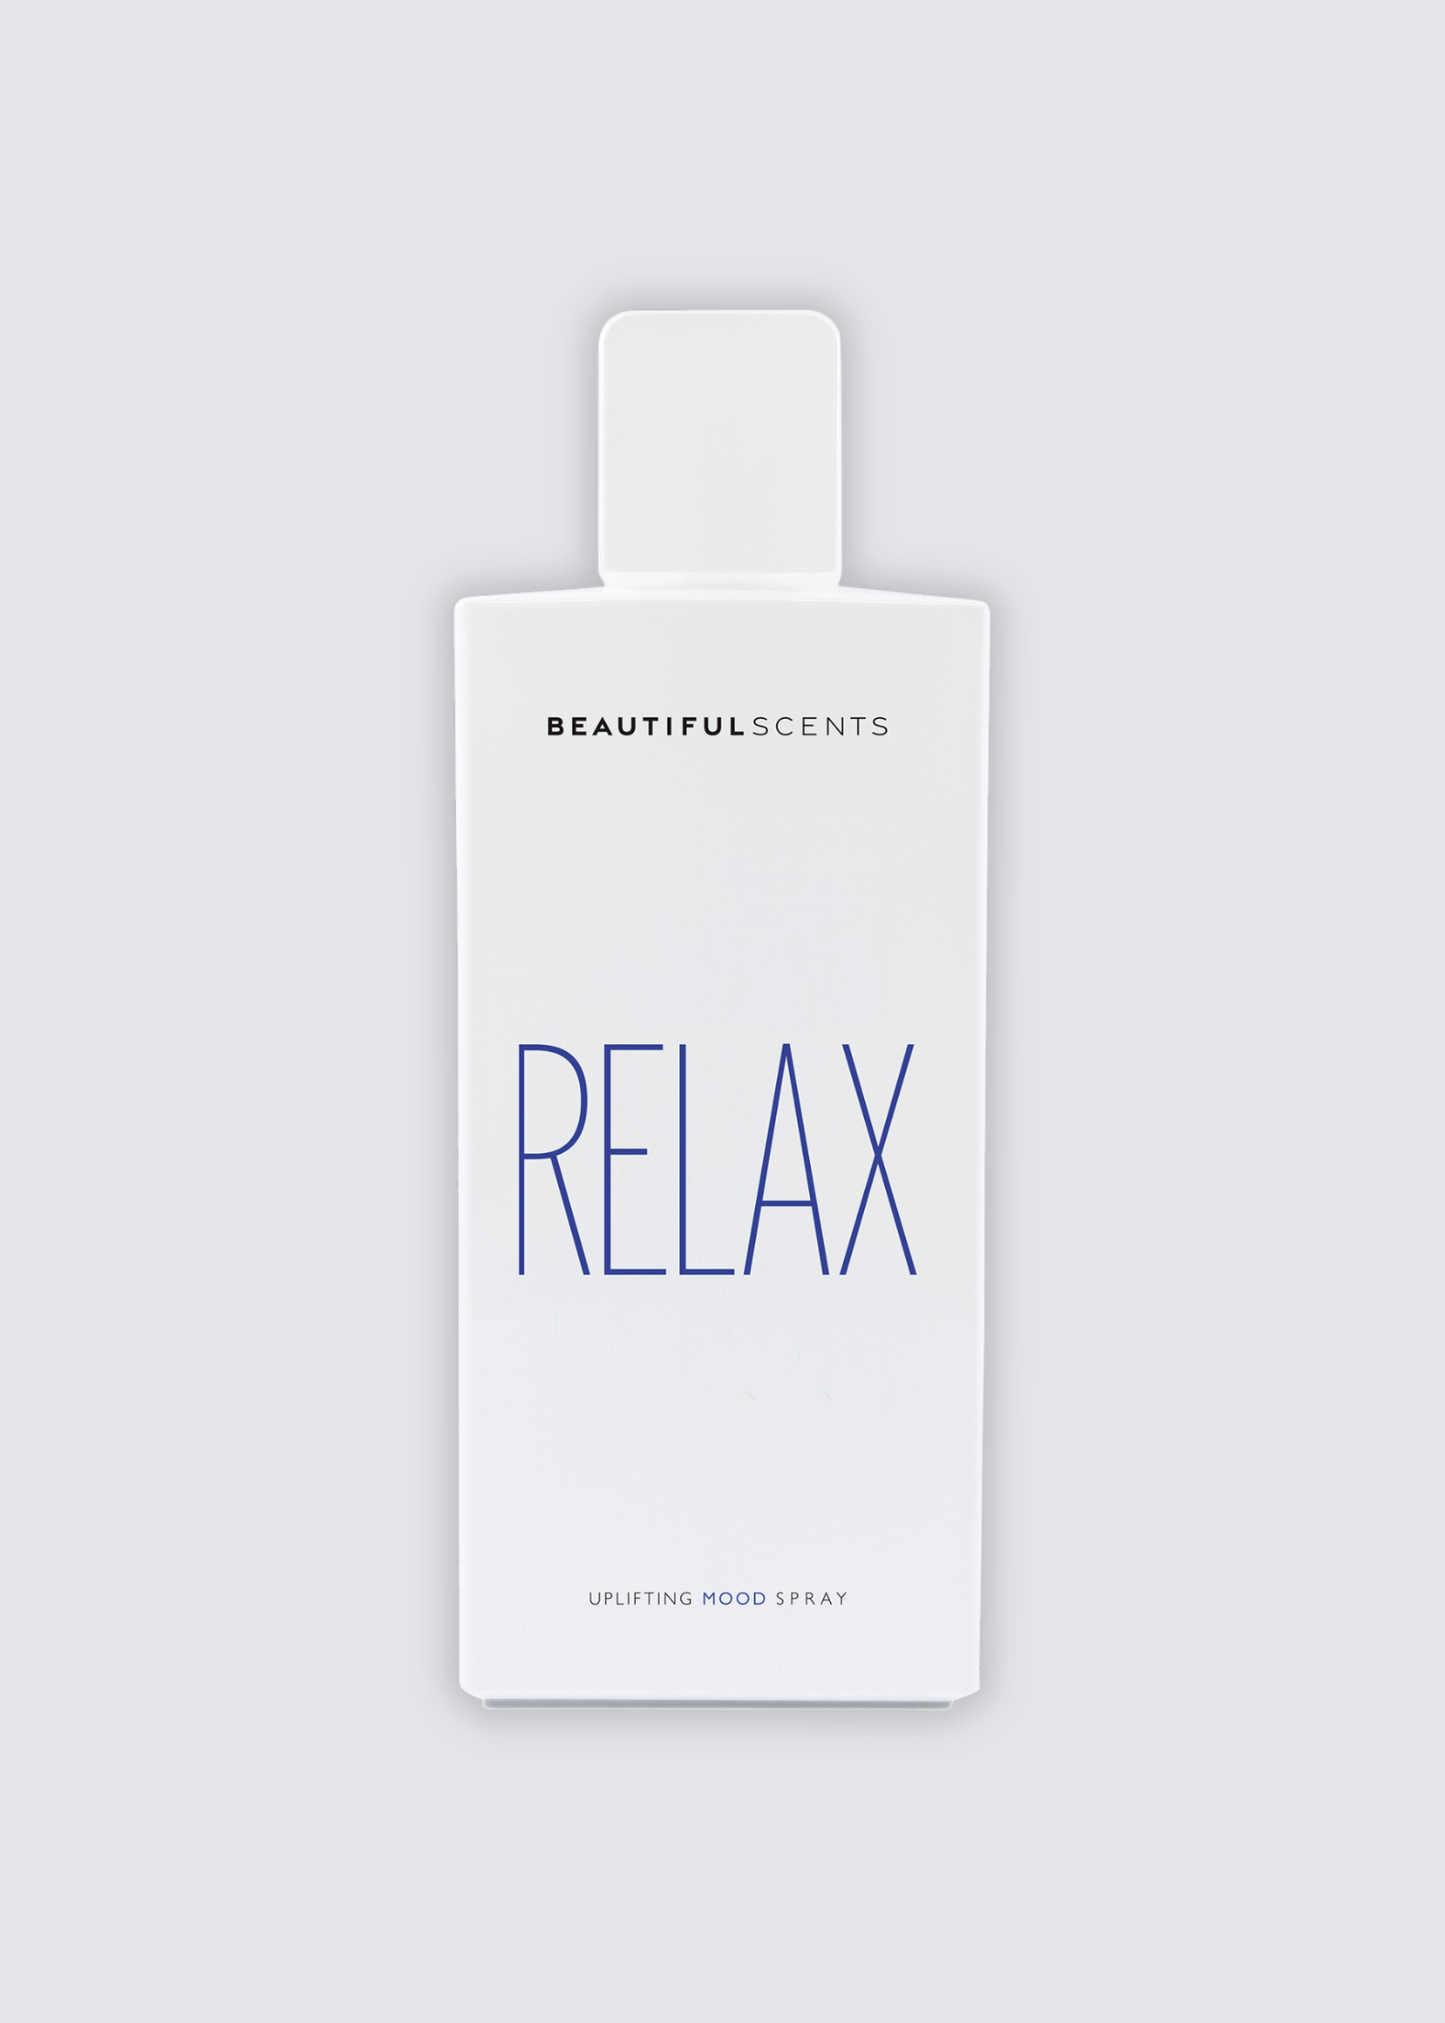 Moodspray, Relax, Duft